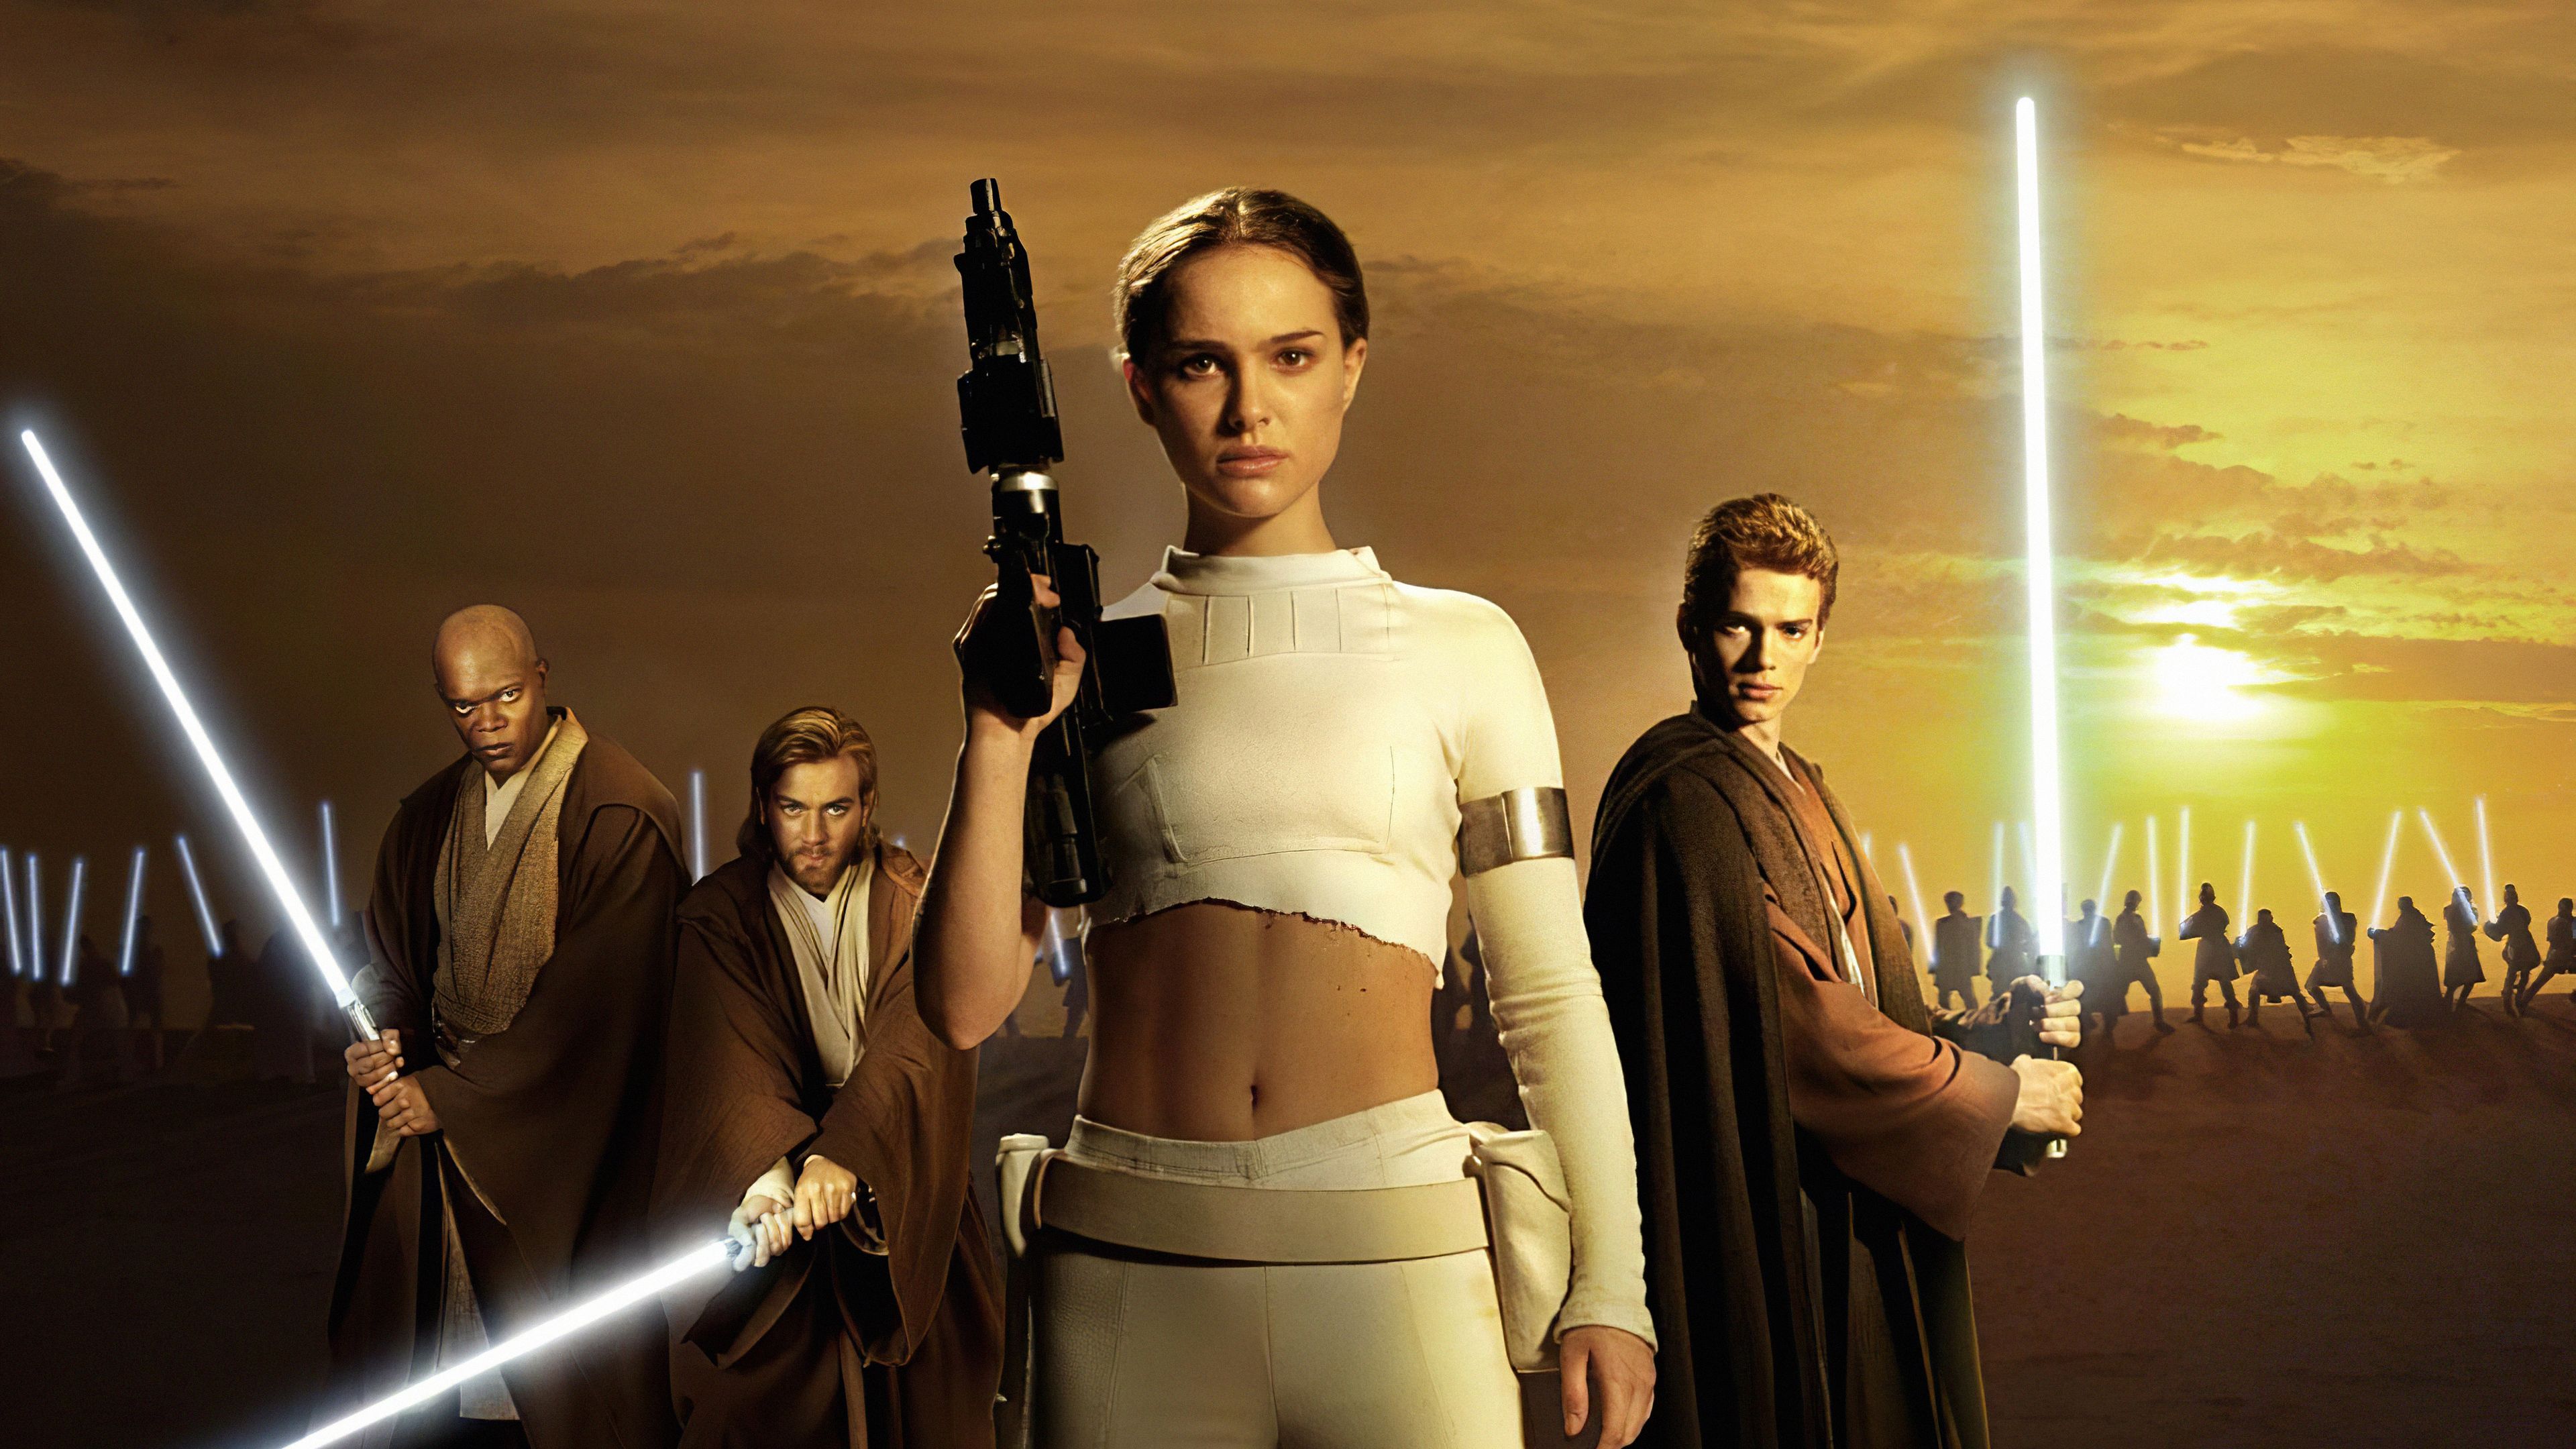 Star Wars Episode II Attack Of The Clones Natalie Portman 4k 2560x1600 Resolution HD 4k Wallpaper, Image, Background, Photo and Picture